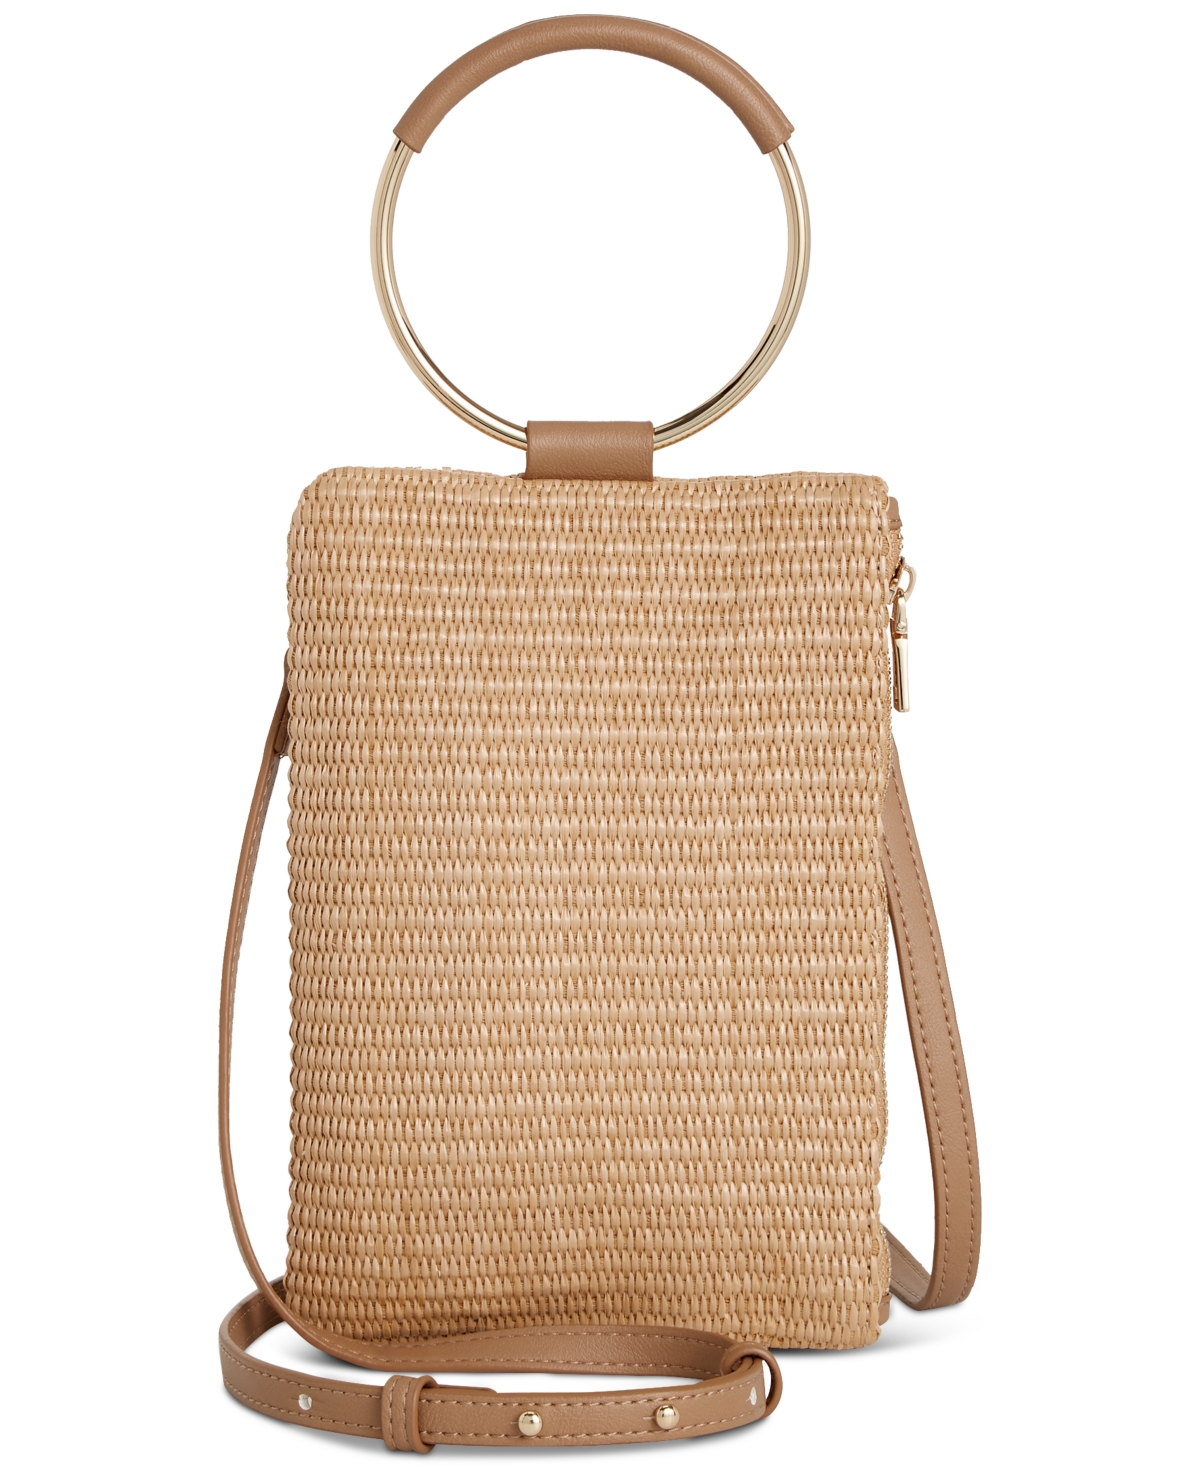 Charlii Small Straw Crossbody, Created for Macy's - Straw/gold Cml